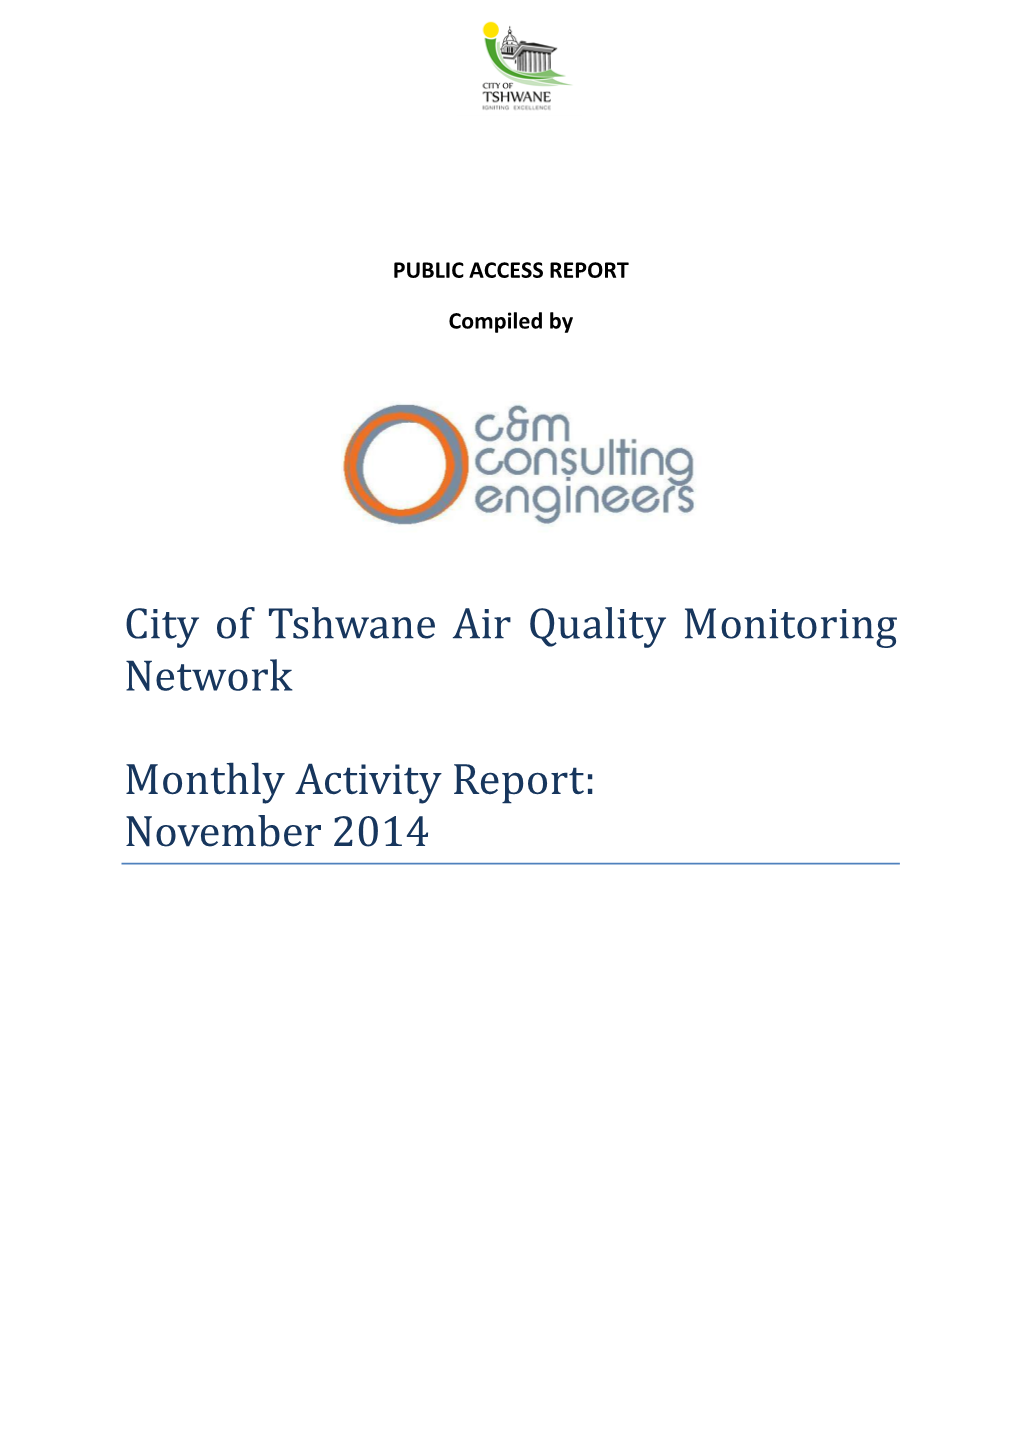 City of Tshwane Air Quality Monitoring Network Monthly Activity Report